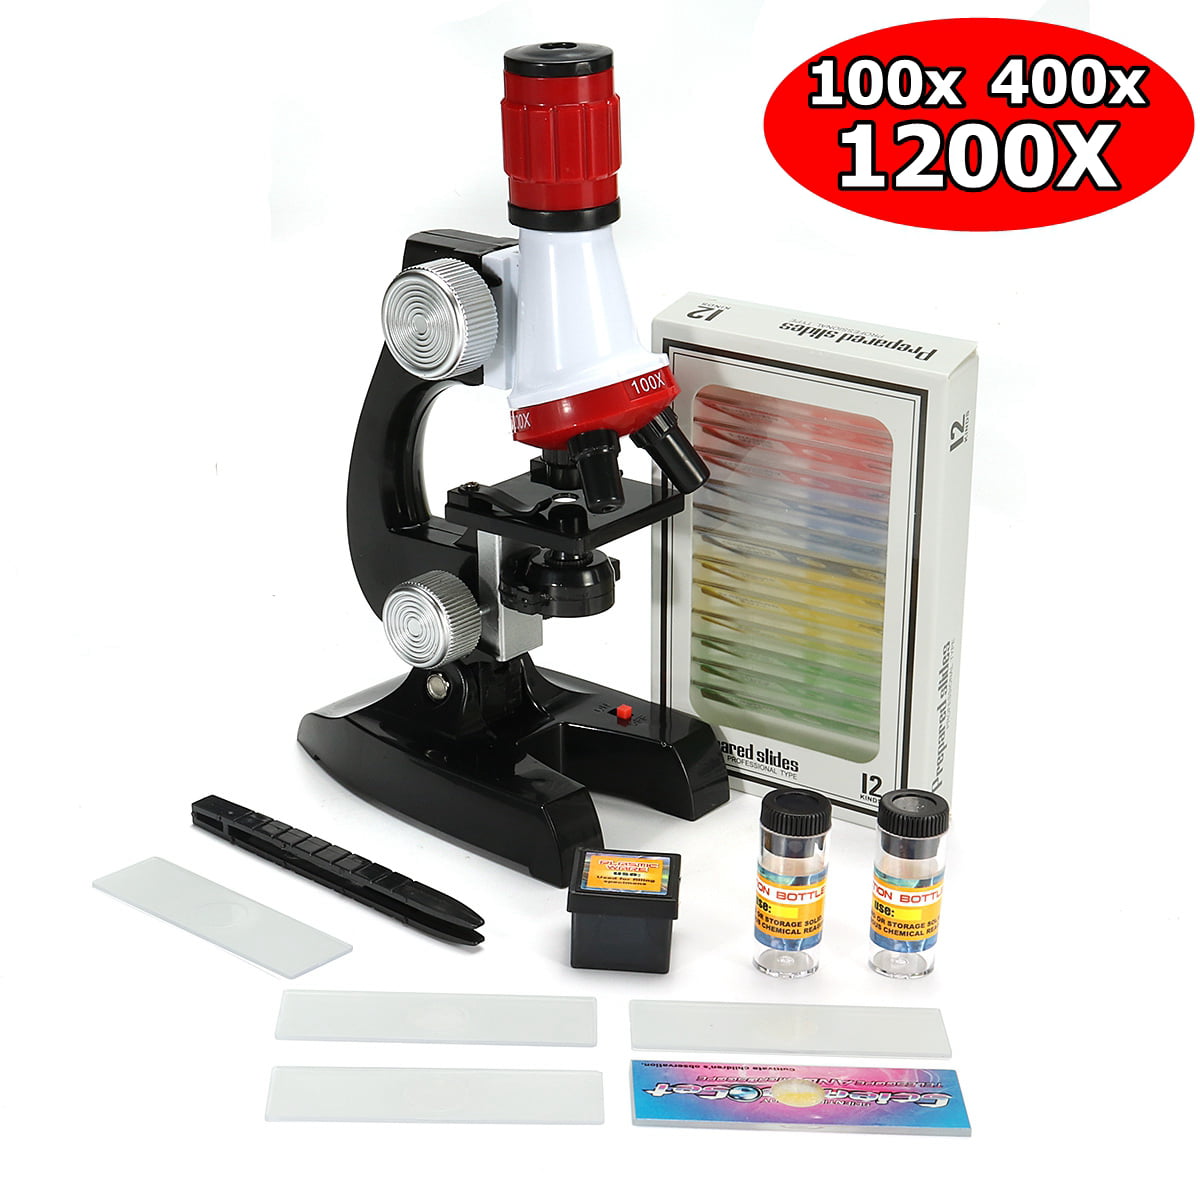 SUZYN Microscope 100X-1200X-1200X Gifts for Kids Beginner Biological Microscope Metal Body with Phone Holder Adapter Plastic Slides Magnification : 100X 600X 1200X